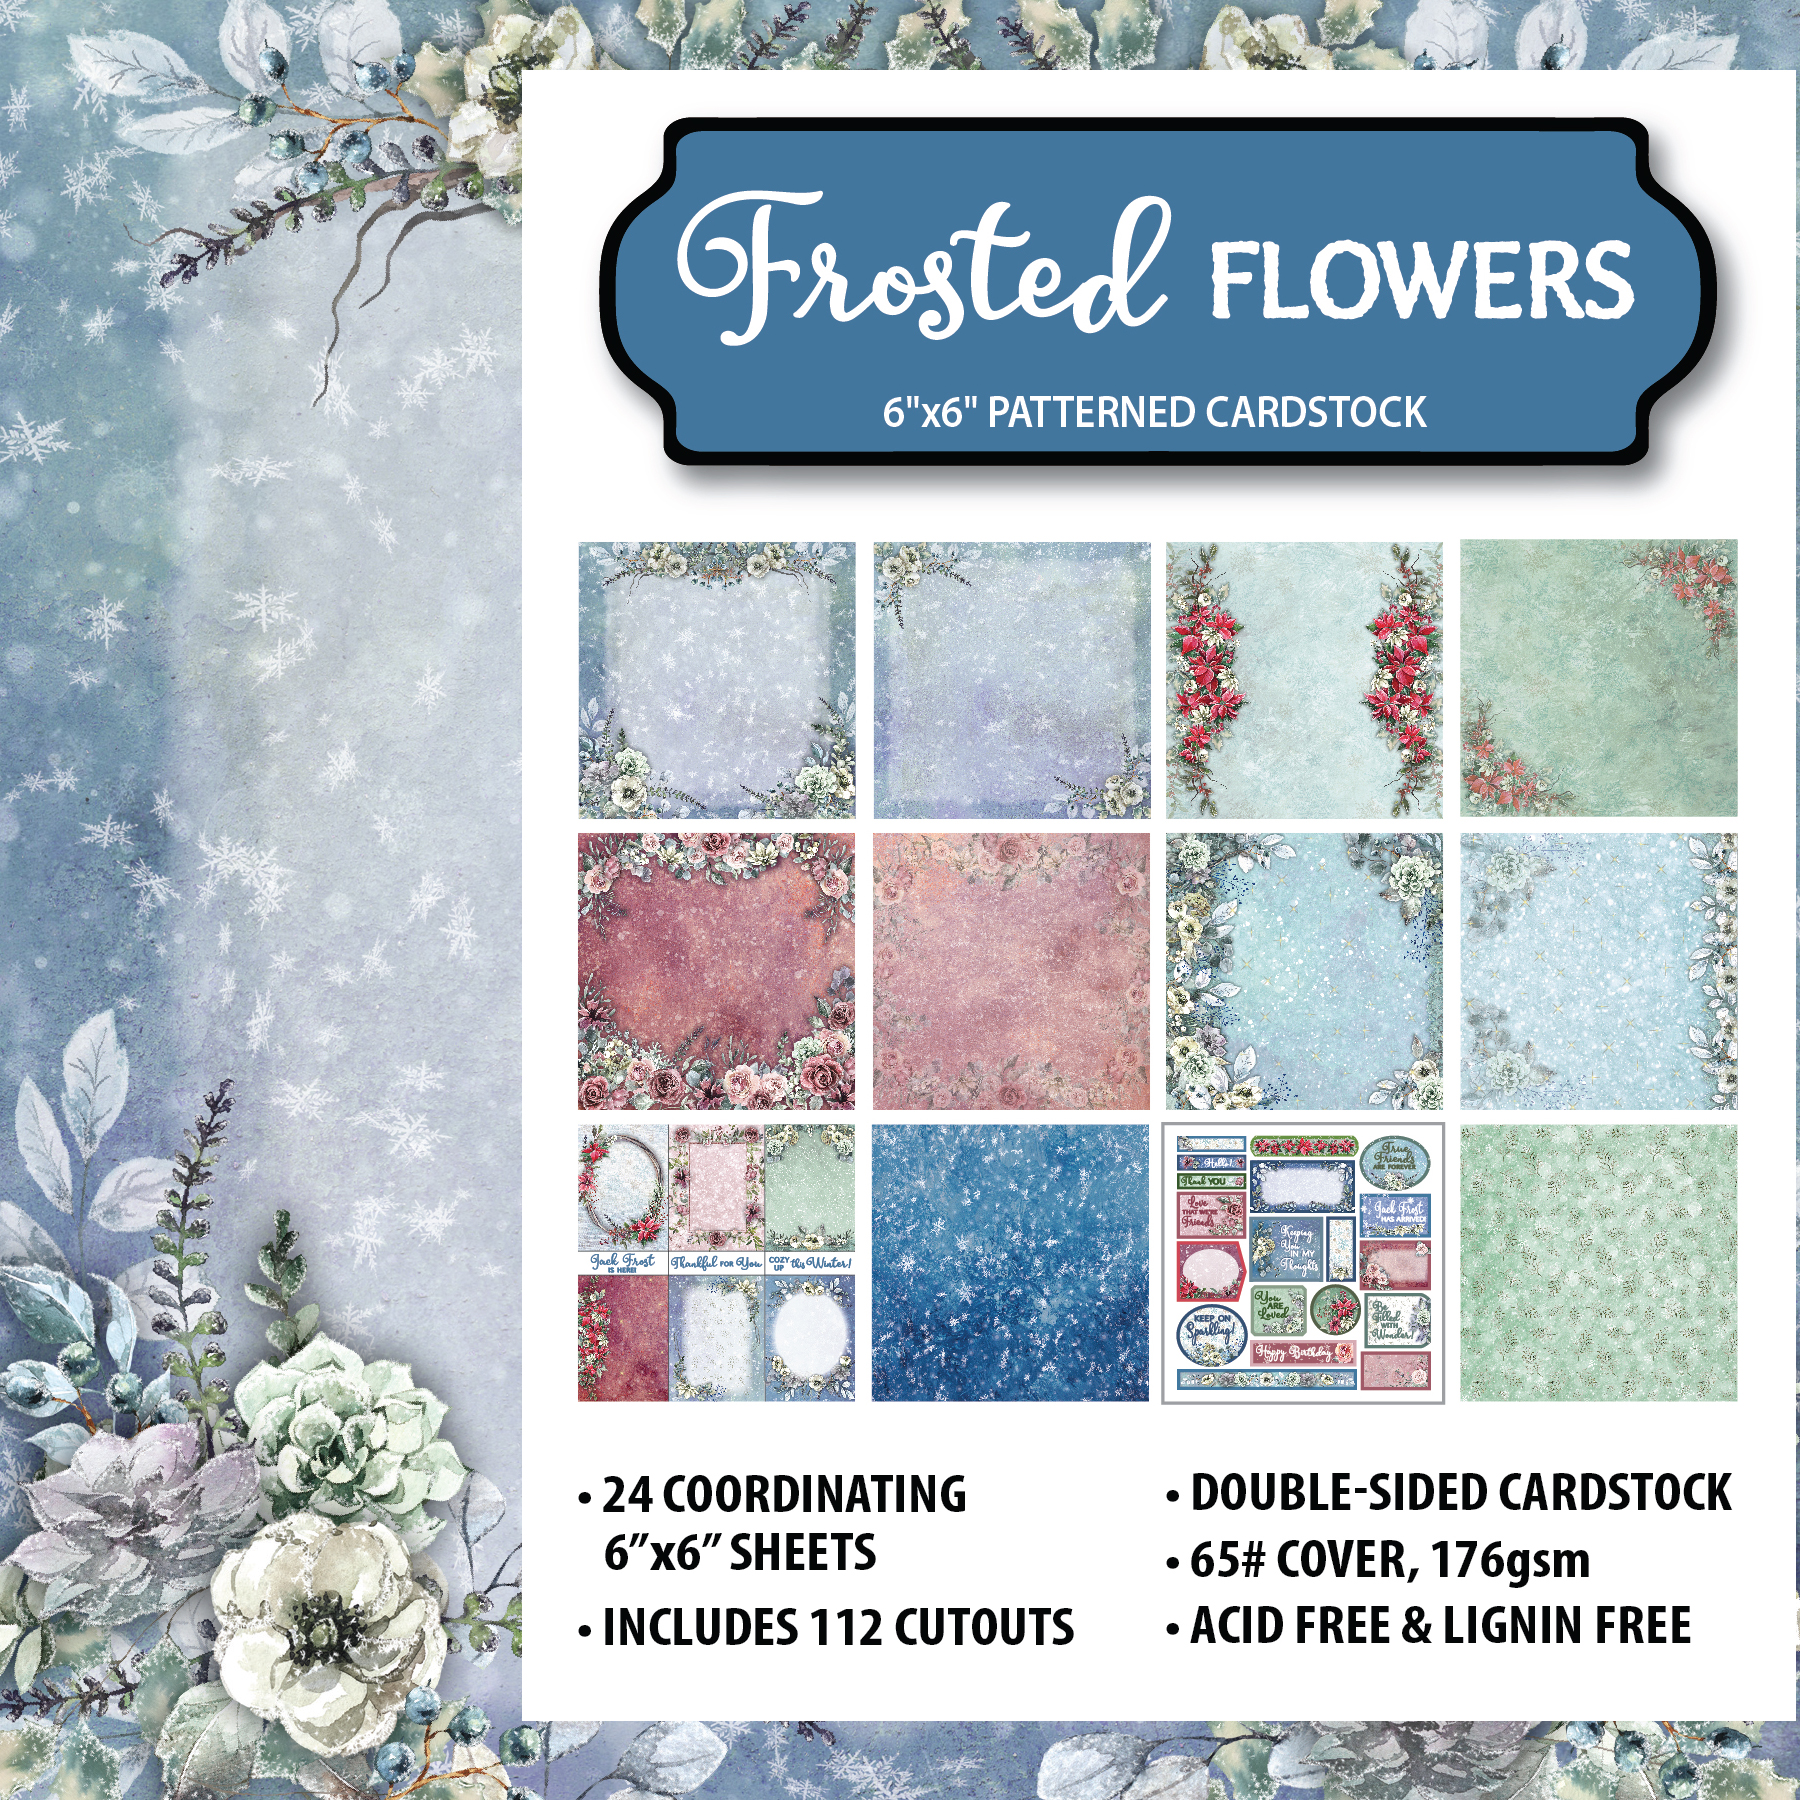 Frosted Flowers 6x6 Patterned Cardstock